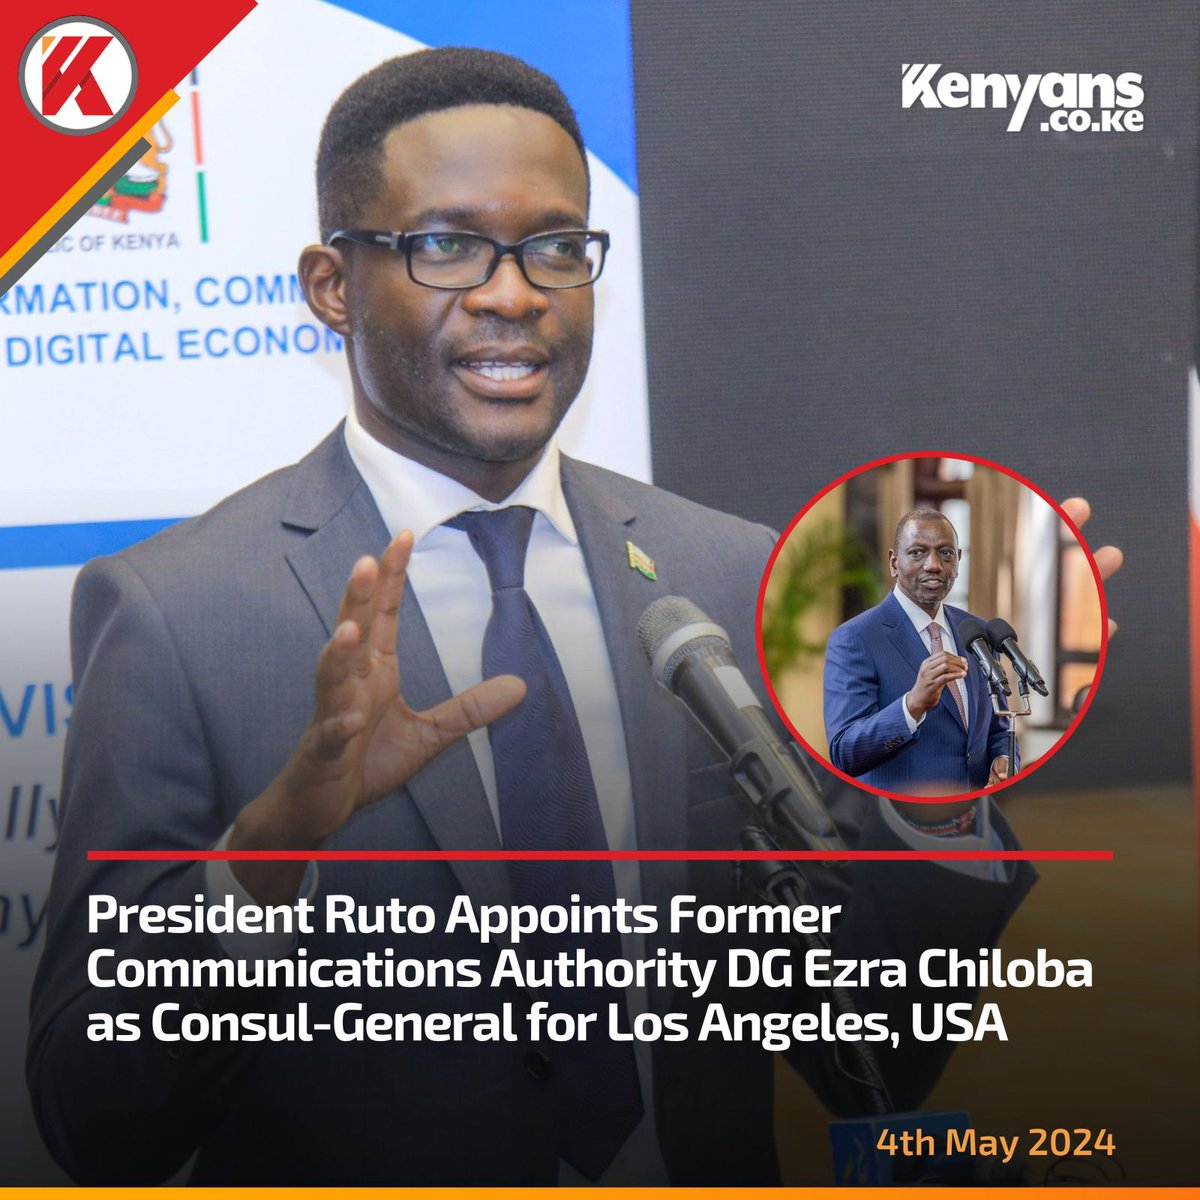 Ruto appoints Chiloba as Consul-General for Los Angeles in USA

Chiloba must have done something for Uhuru & Ruto in 2017.

Difference between Igathe & Chiloba is that one resigns and the other one gets fired, but they will never be unemployed.

May the God of Chiloba locate you.